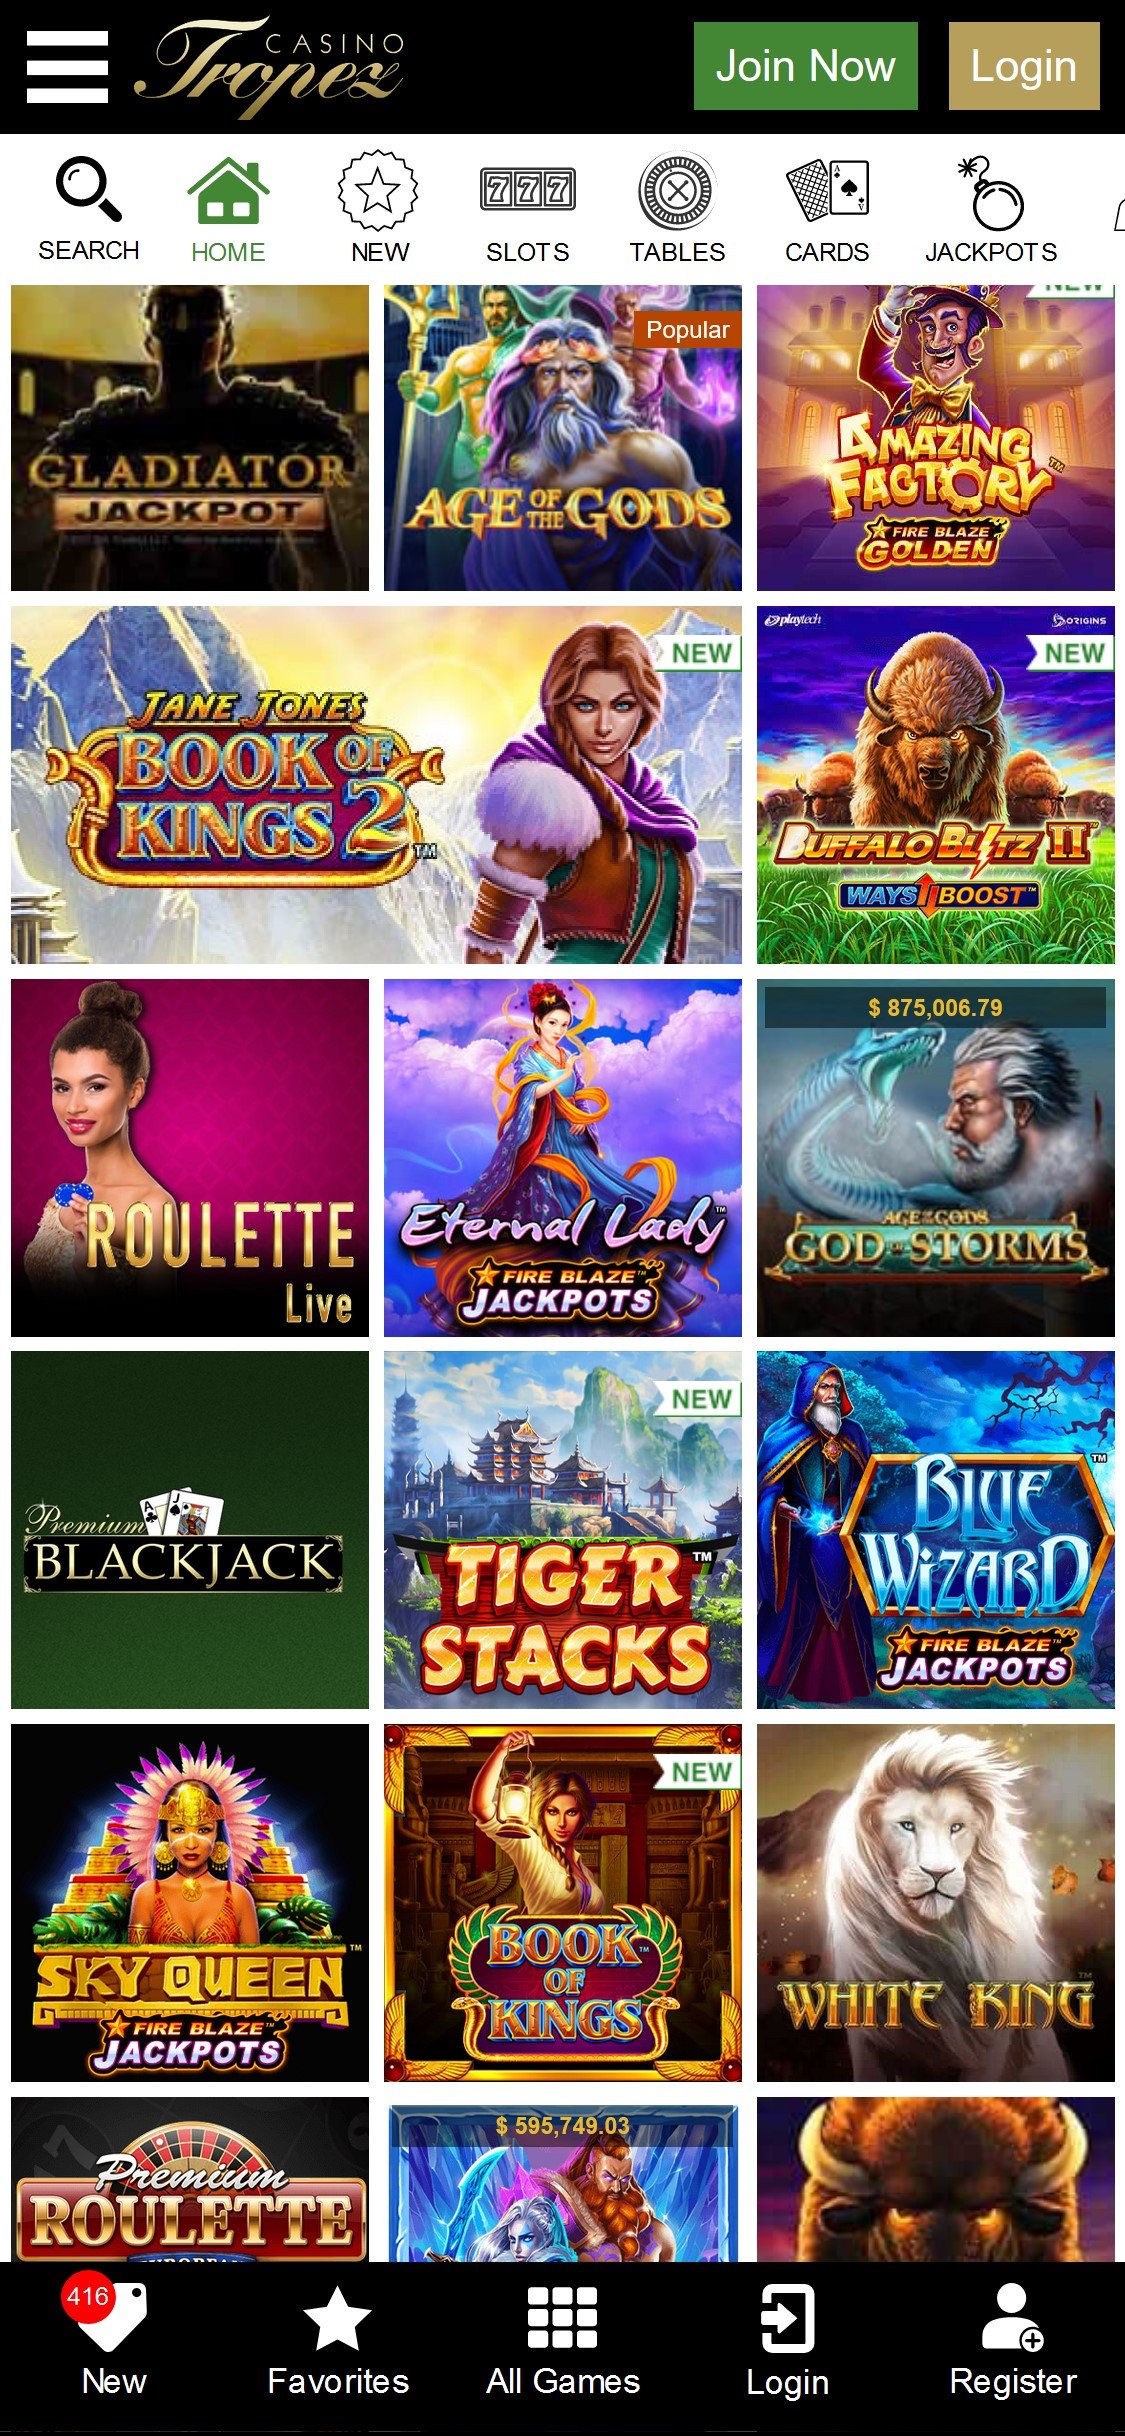 Trope Z Casino Mobile Games Review